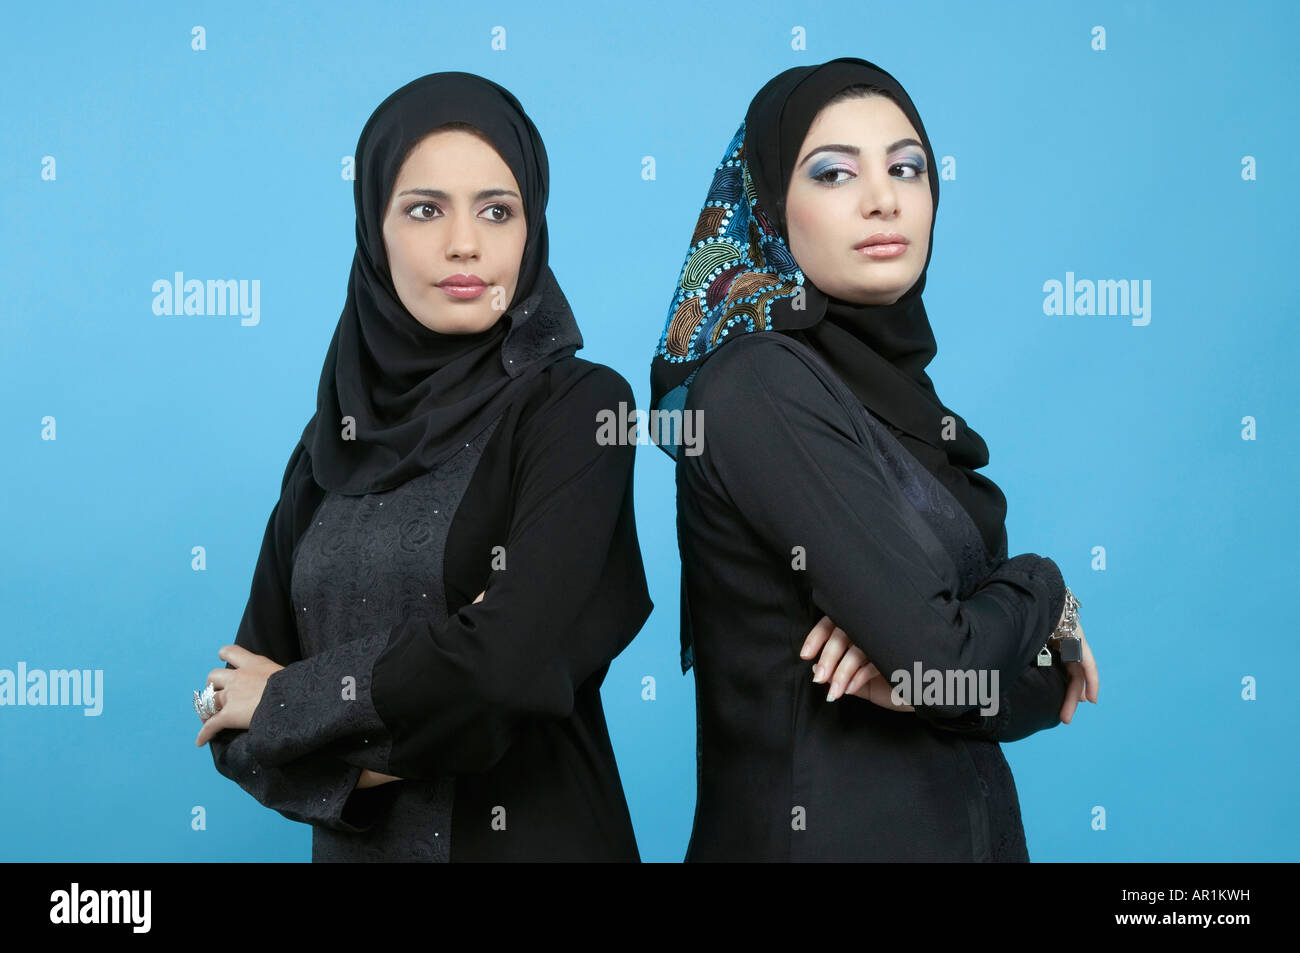 Two Arab Ladies angry with each other Stock Photo